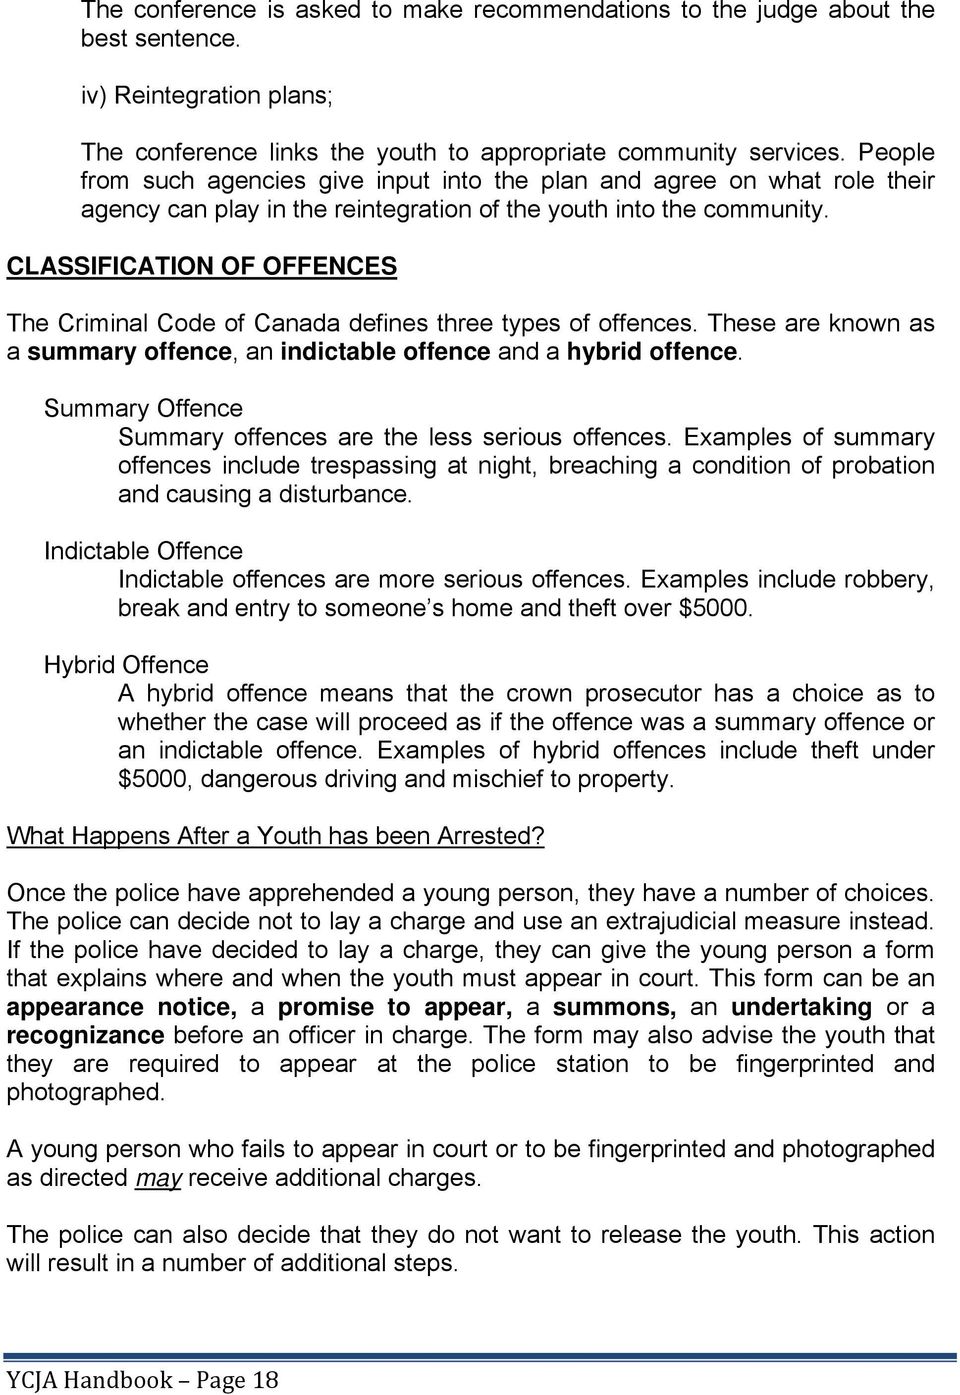 CLASSIFICATION OF OFFENCES The Criminal Code of Canada defines three types of offences. These are known as a summary offence, an indictable offence and a hybrid offence.